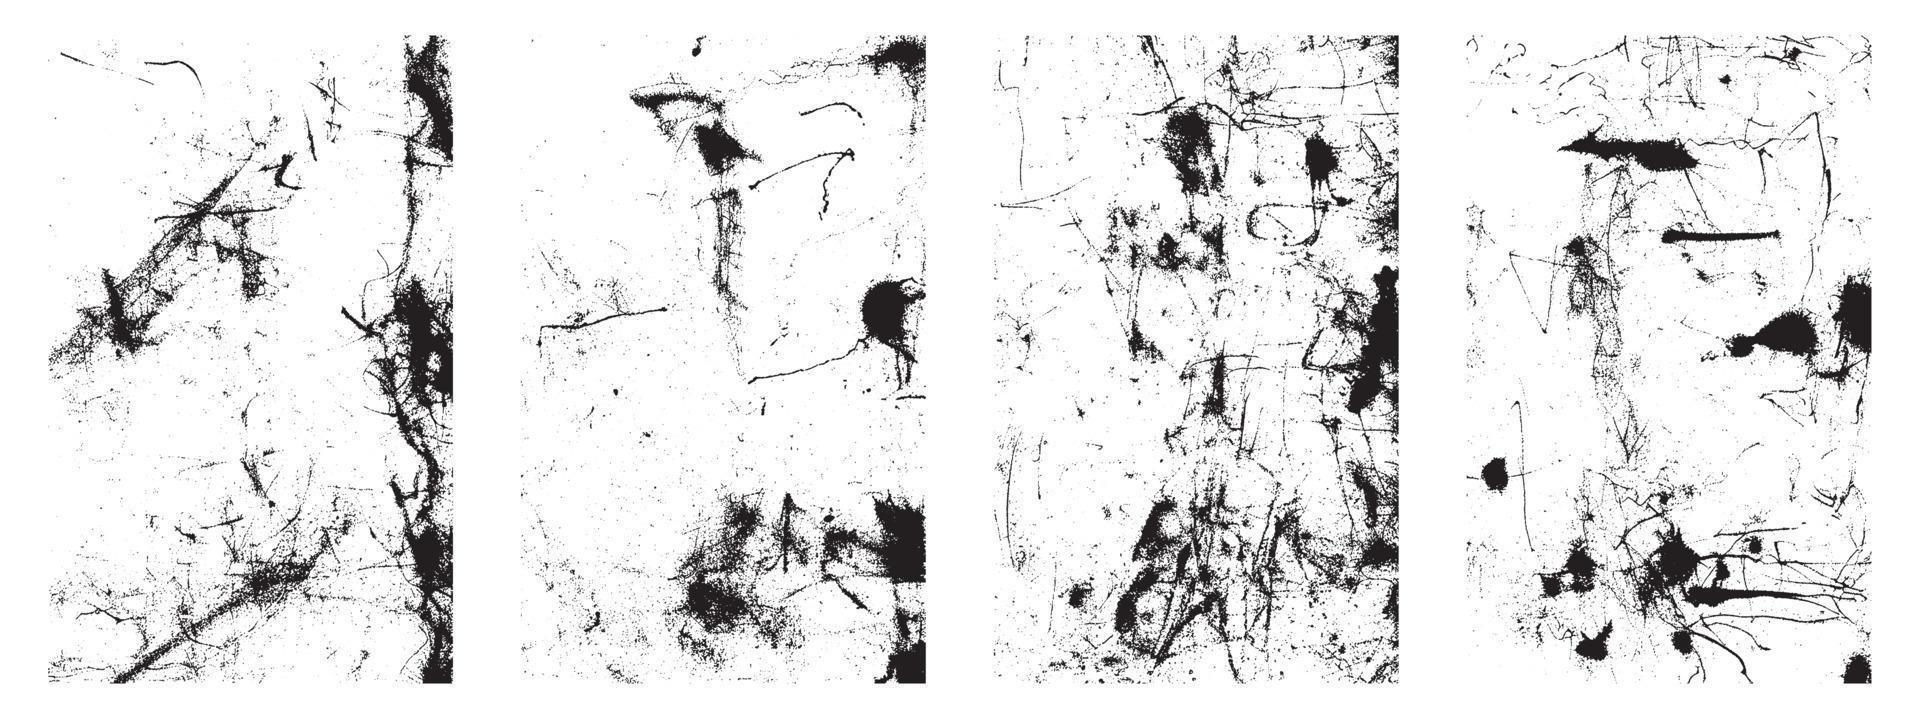 Set of Grunge Vector Textures. Black and White Backgrounds with Distress Effects. EPS 10.